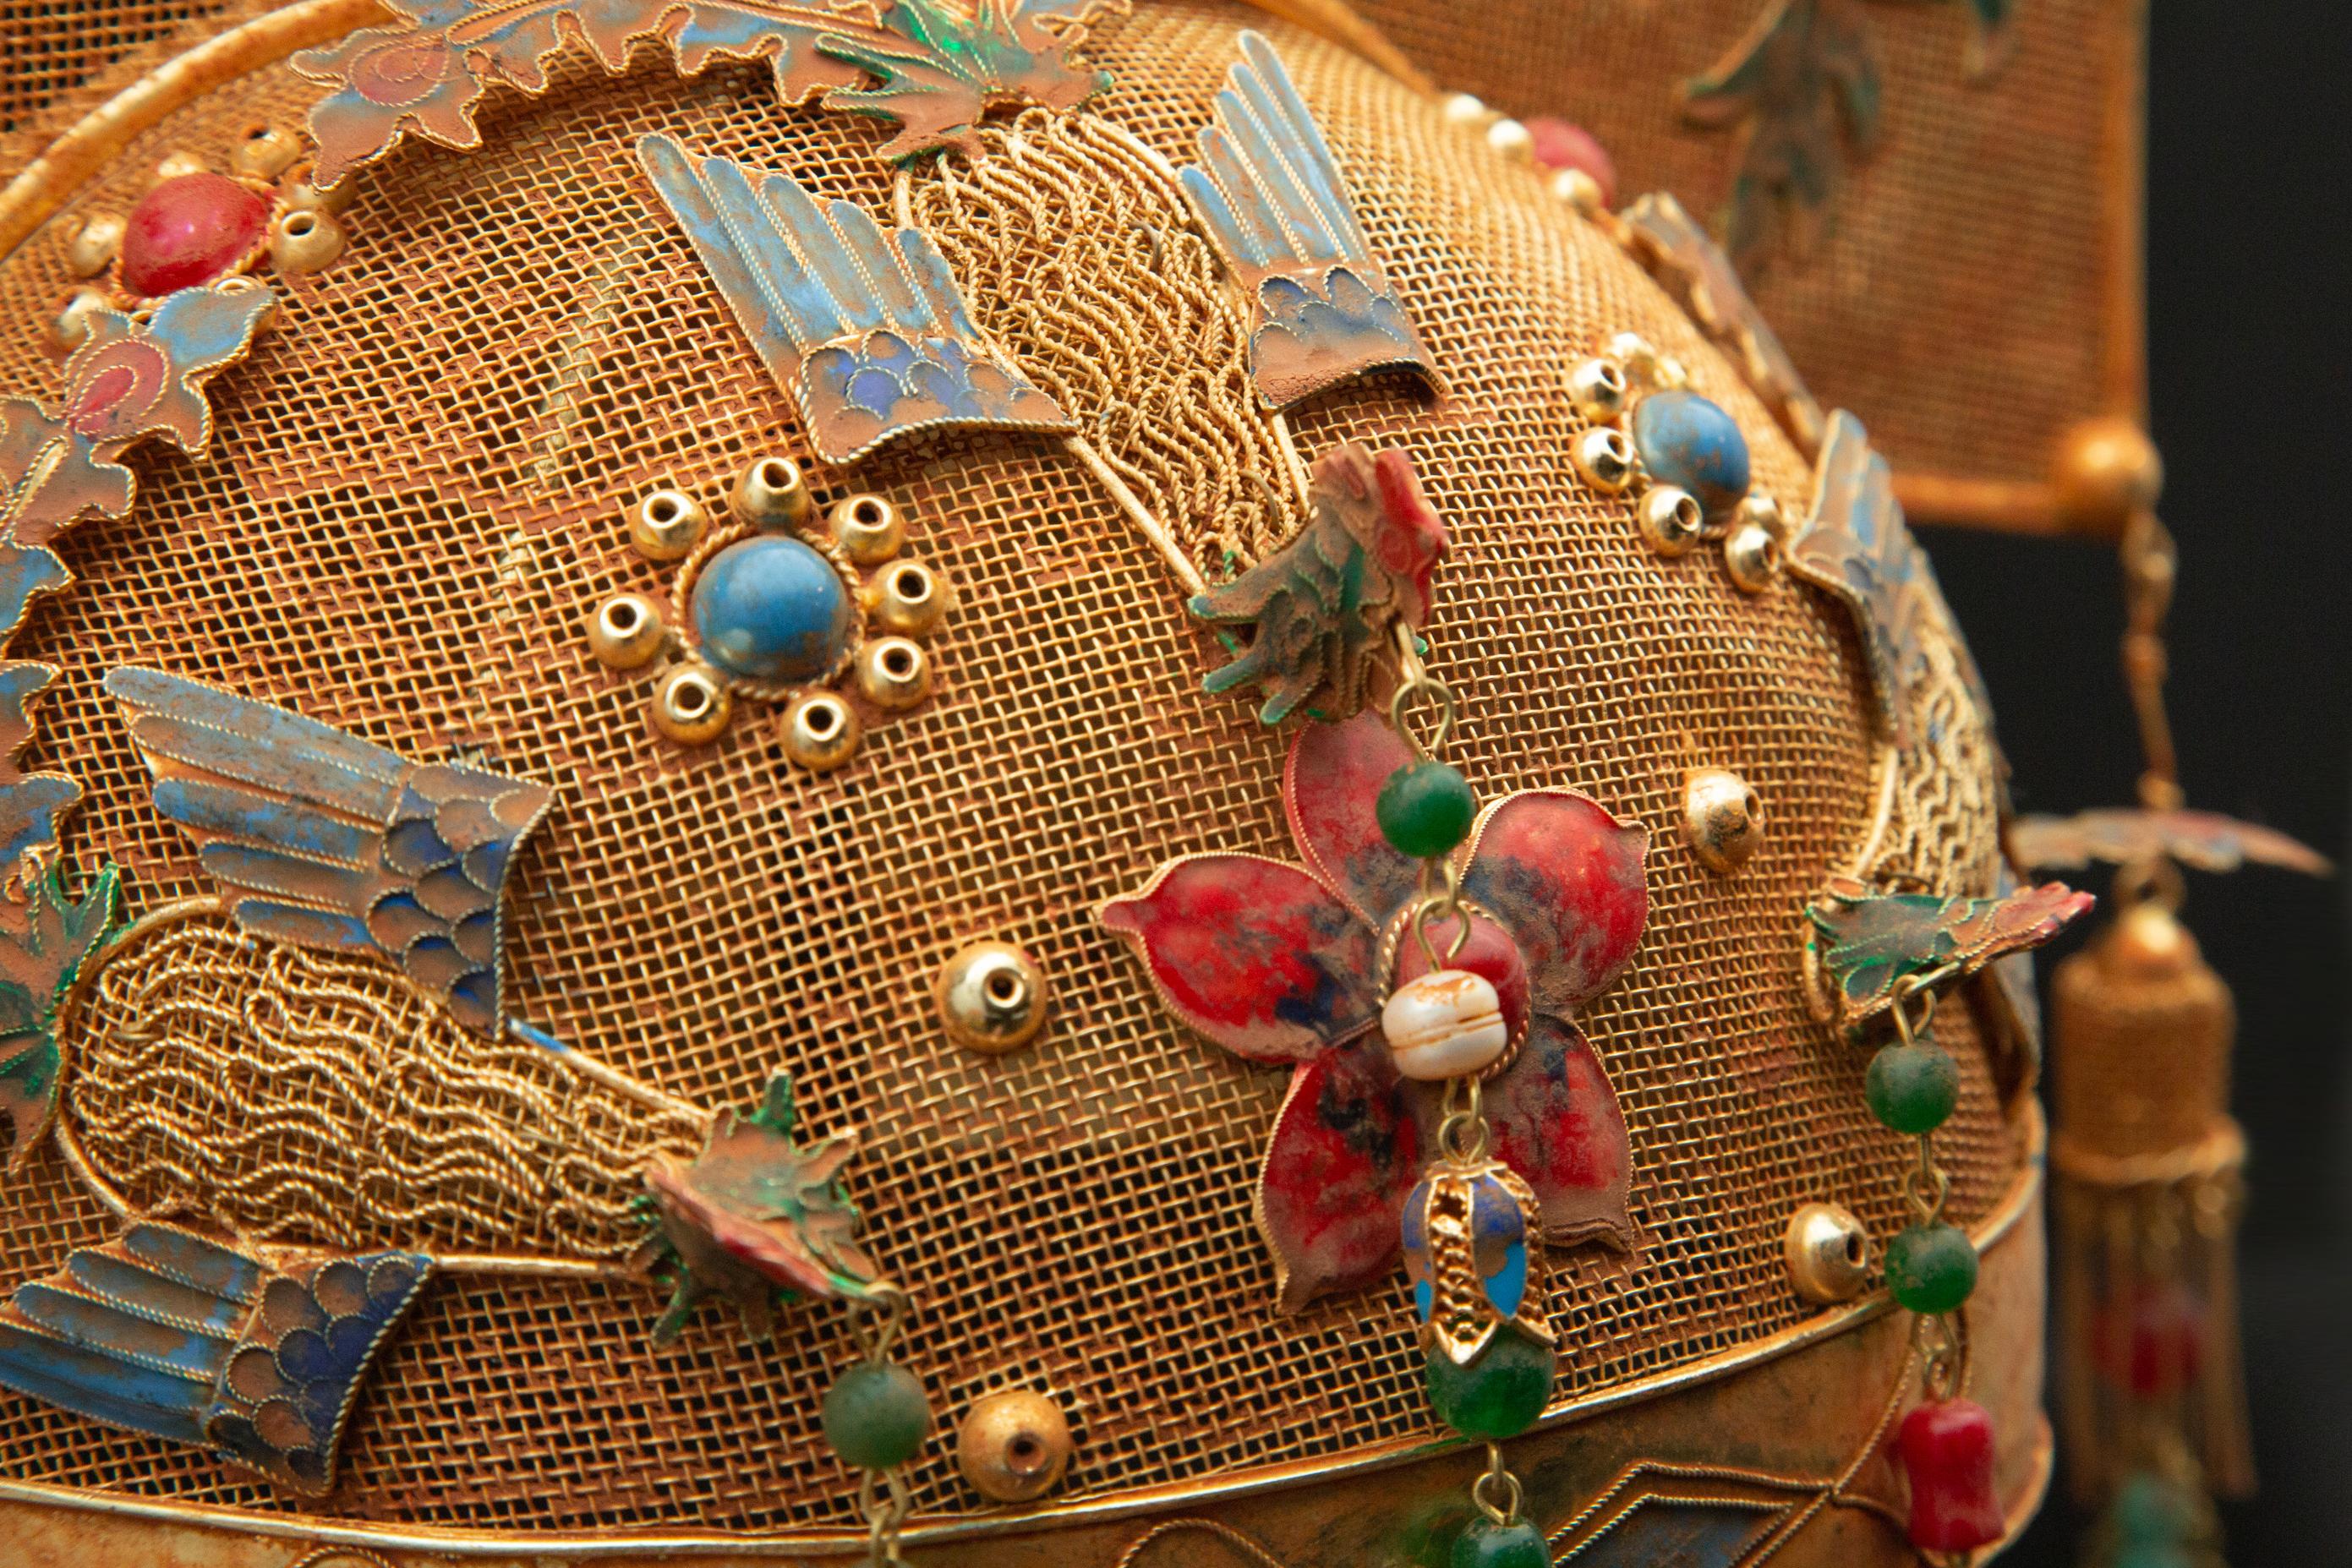 Chinese Opera Theatre Headdress, Rose. Chinese opera theatre headdress gilded and enamel with rose, pearls, turquoise flowers, beaded tassels, and red stones. Mid-20th century, mounted on a custom black painted metal base. 20.5